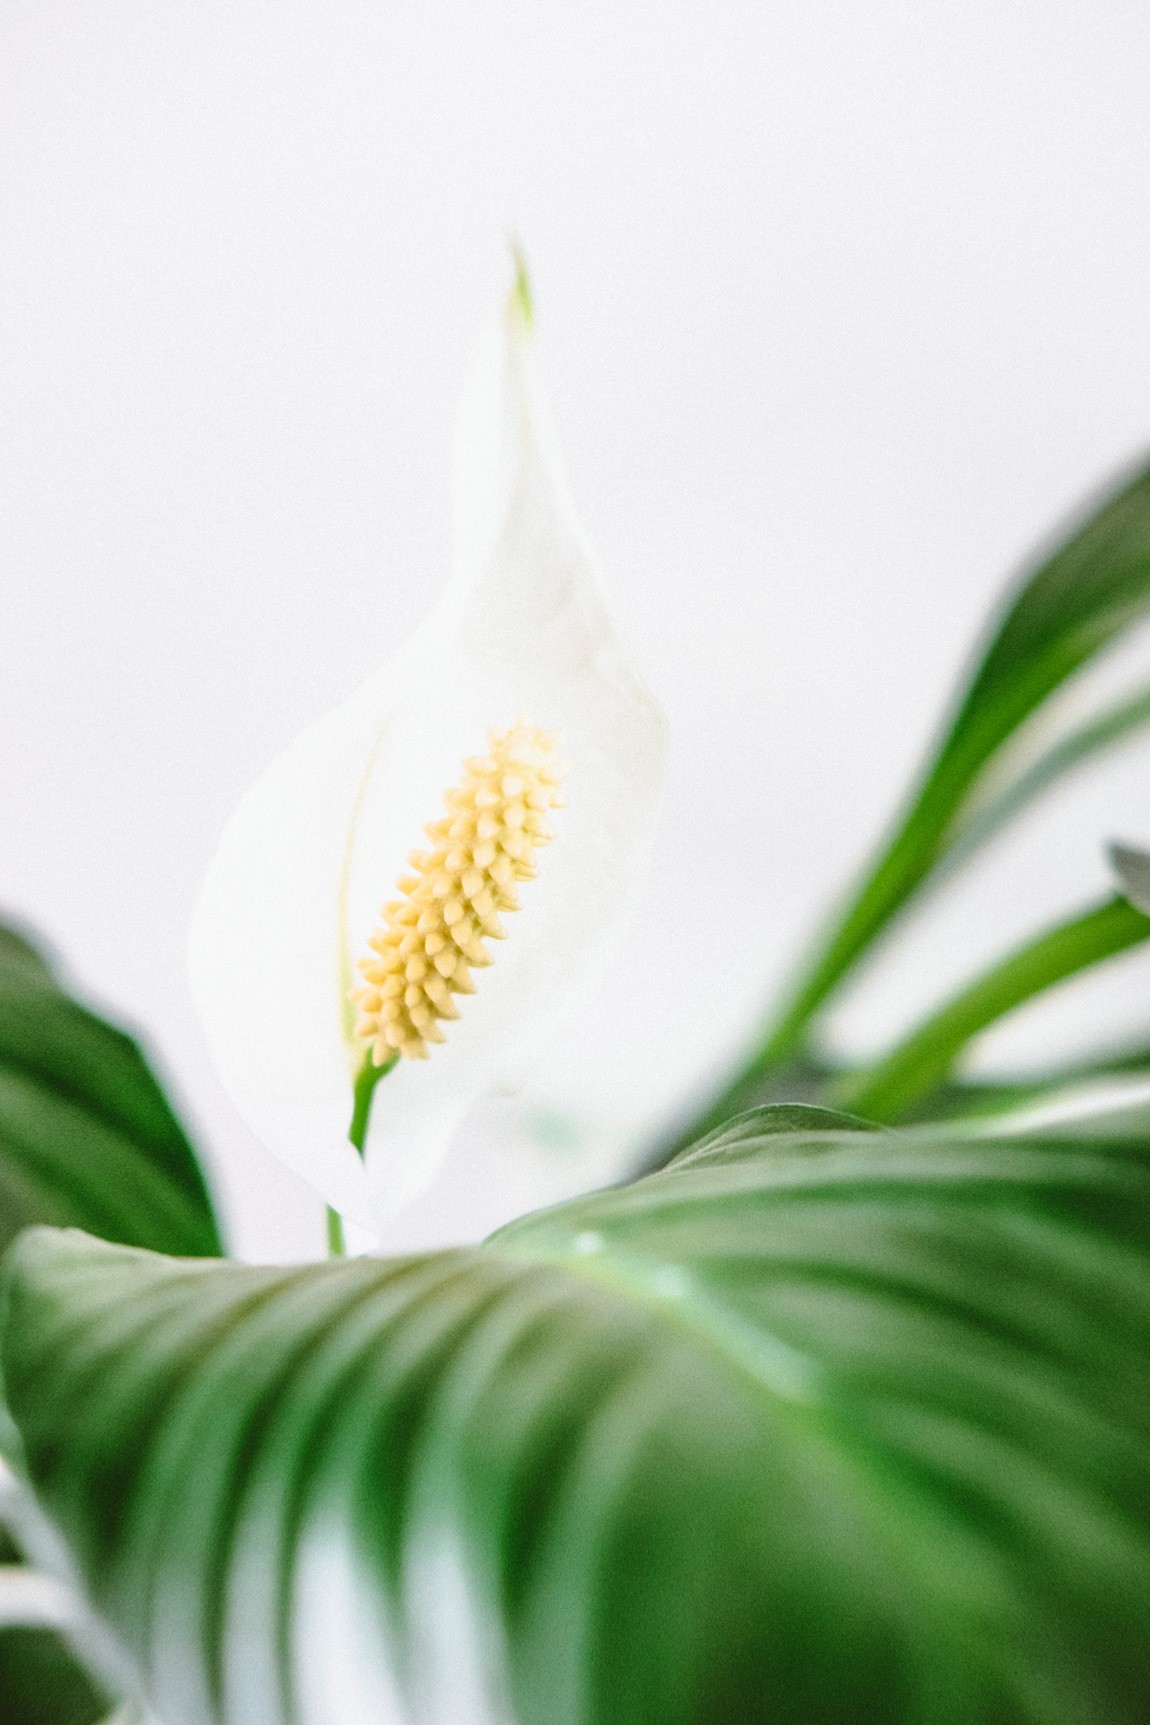 House plants can help care for your wellbeing, with many benefits. Here are some of them: - they purify the air, by removing pollutants and releasing oxygen - the let out phytochemicals, limiting mold spores and bacteria in the air - make the air more humid, great in houses with central heating - help you concentrate - lift your spirit, lowers heart rate and blood pressure improves relationships (yes really!). So now, which is the best house plant to buy? Read the blog at chalkandmoss.com to find out!